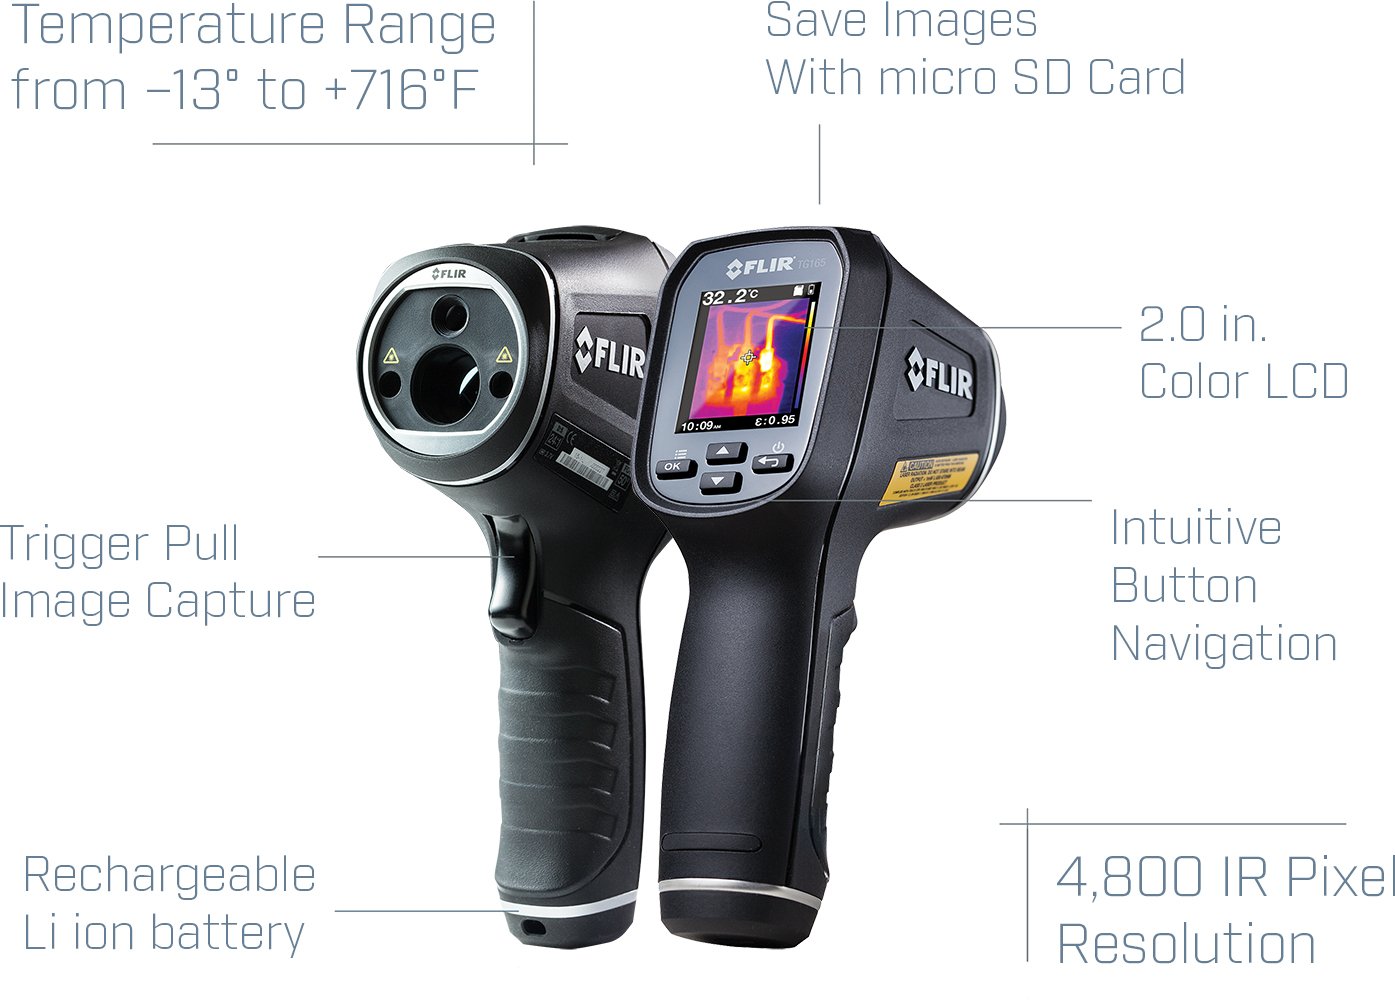 Nicololfle Thermal Imaging Imaging Handheld Infrared Spot Camera with High Pixel 220 x 160 IR Resolution 